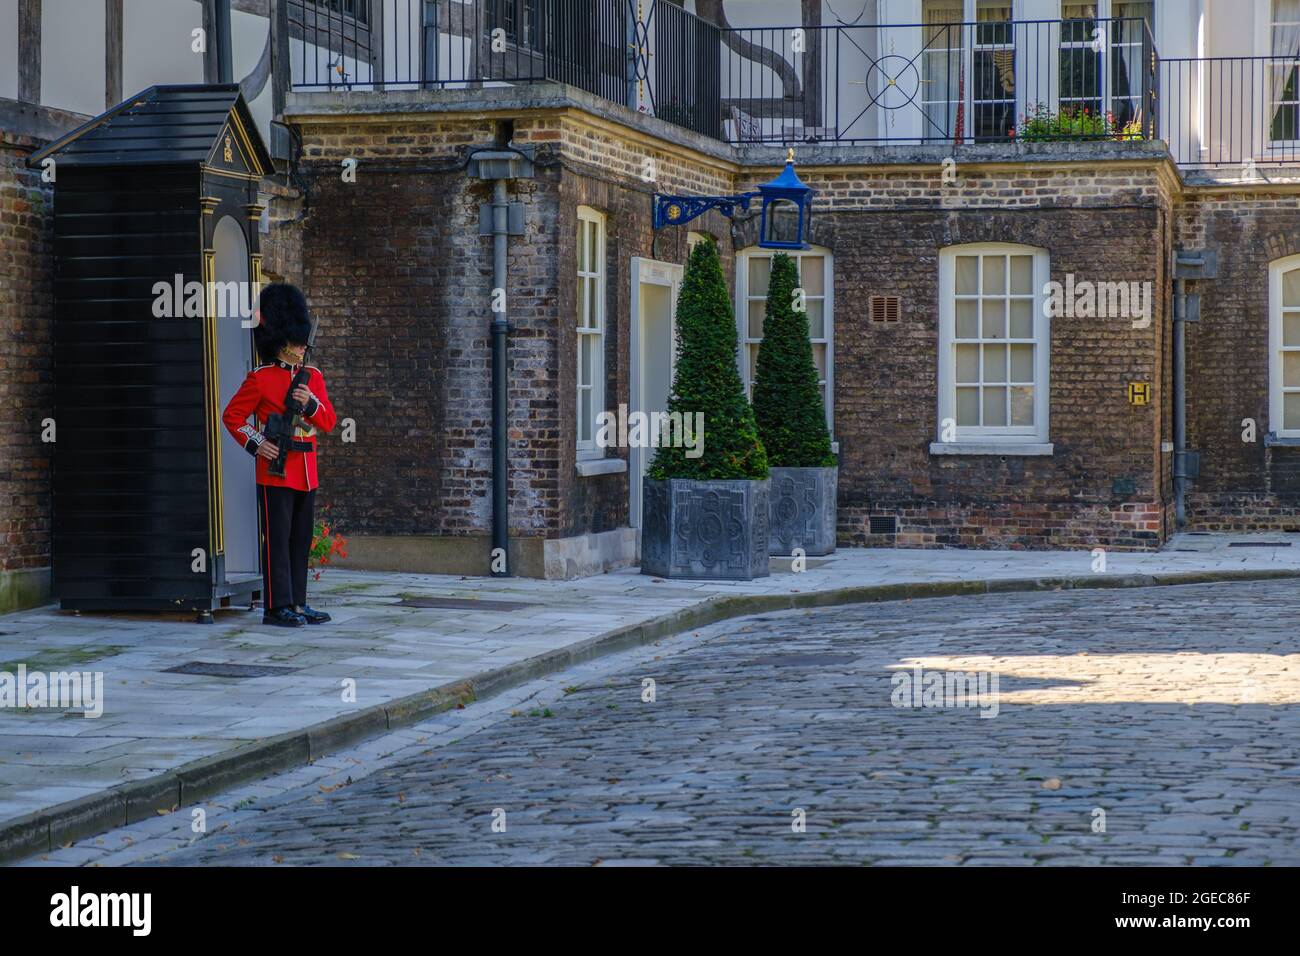 Staycation idea. Coldstream Guards sentry in military dress holding a gun posted at sentry box in front of the Queen's House at the Tower of London UK Stock Photo